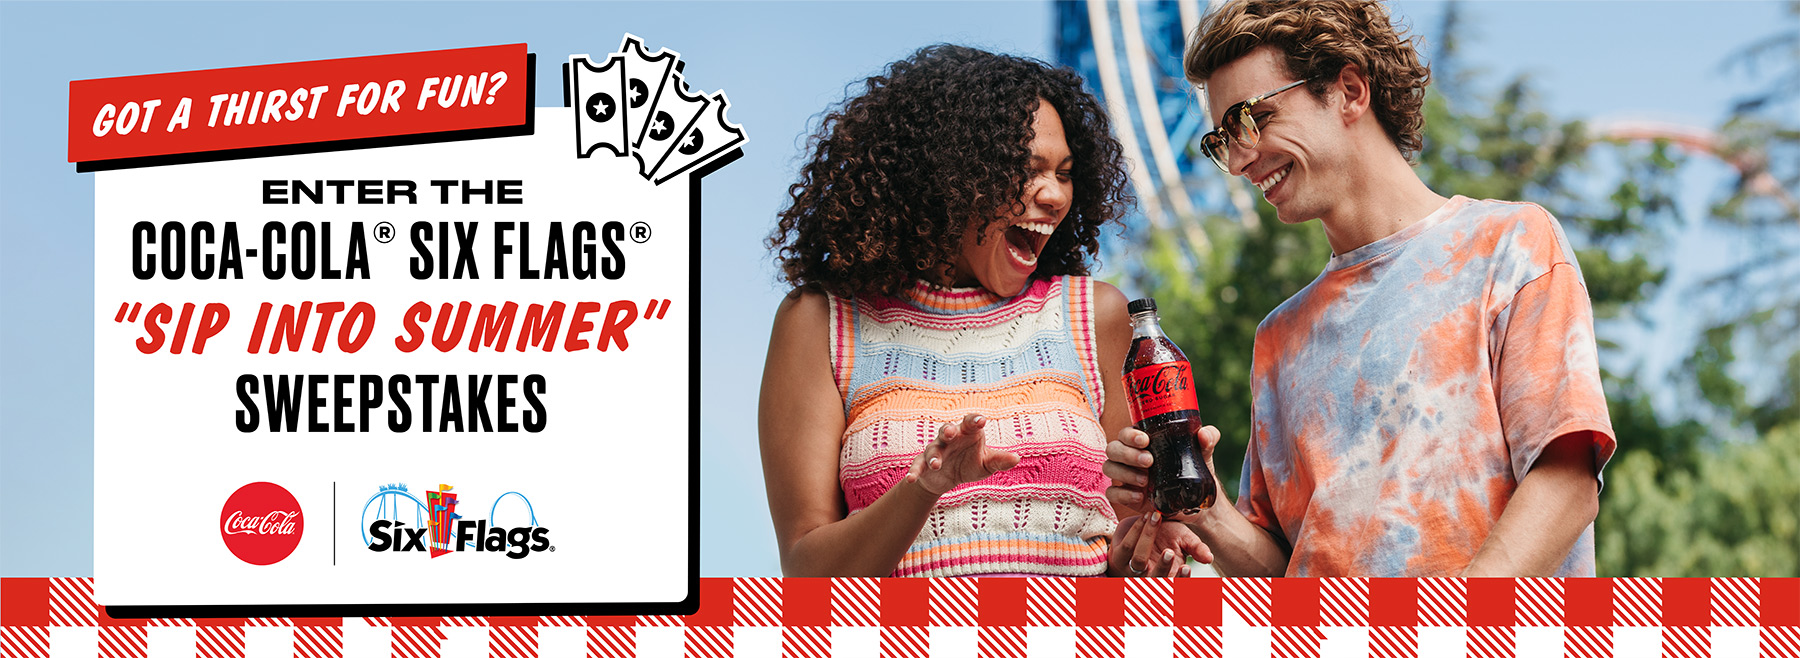 Eat at Jack's Coca-Cola Six Flags Sweepstakes